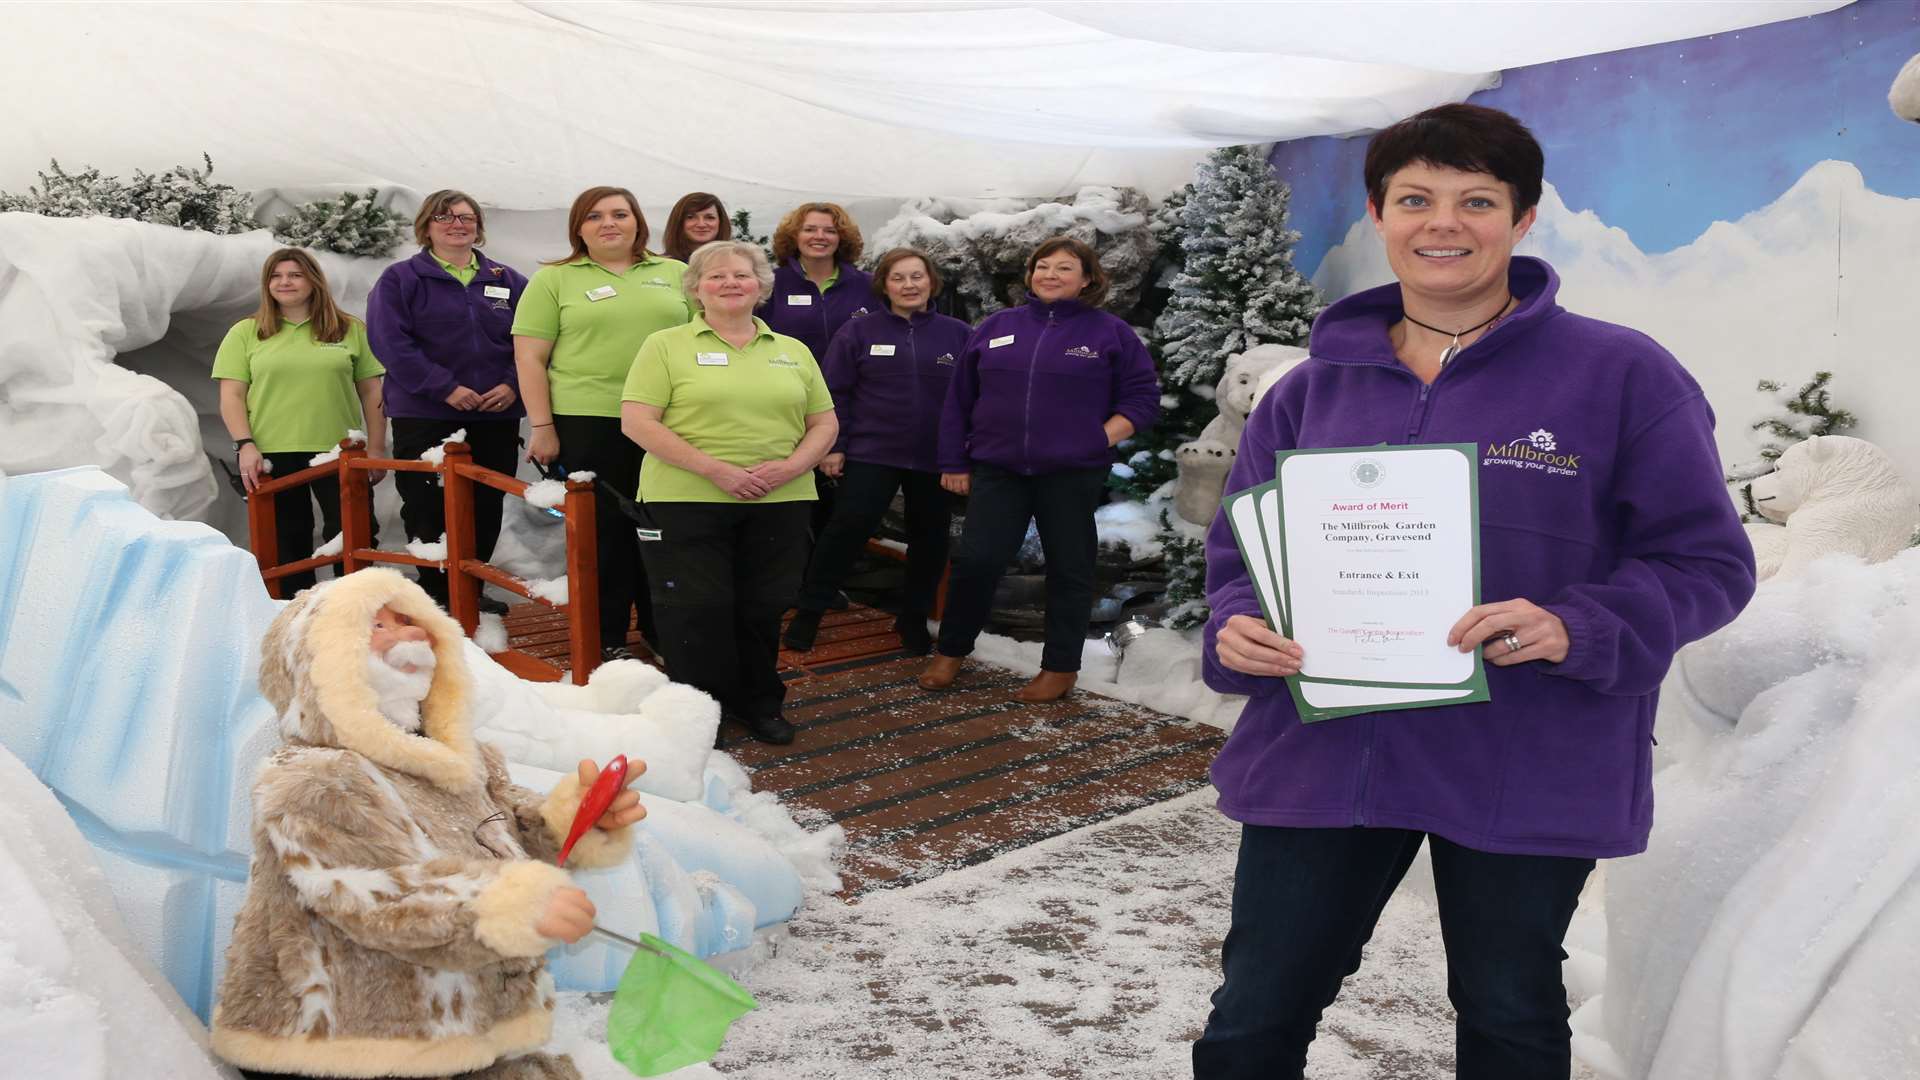 Tammy Woodhouse, managing director of Millbrook Garden Centre, Station Road, Southfleet, with the award for winning regional best Christmas display.